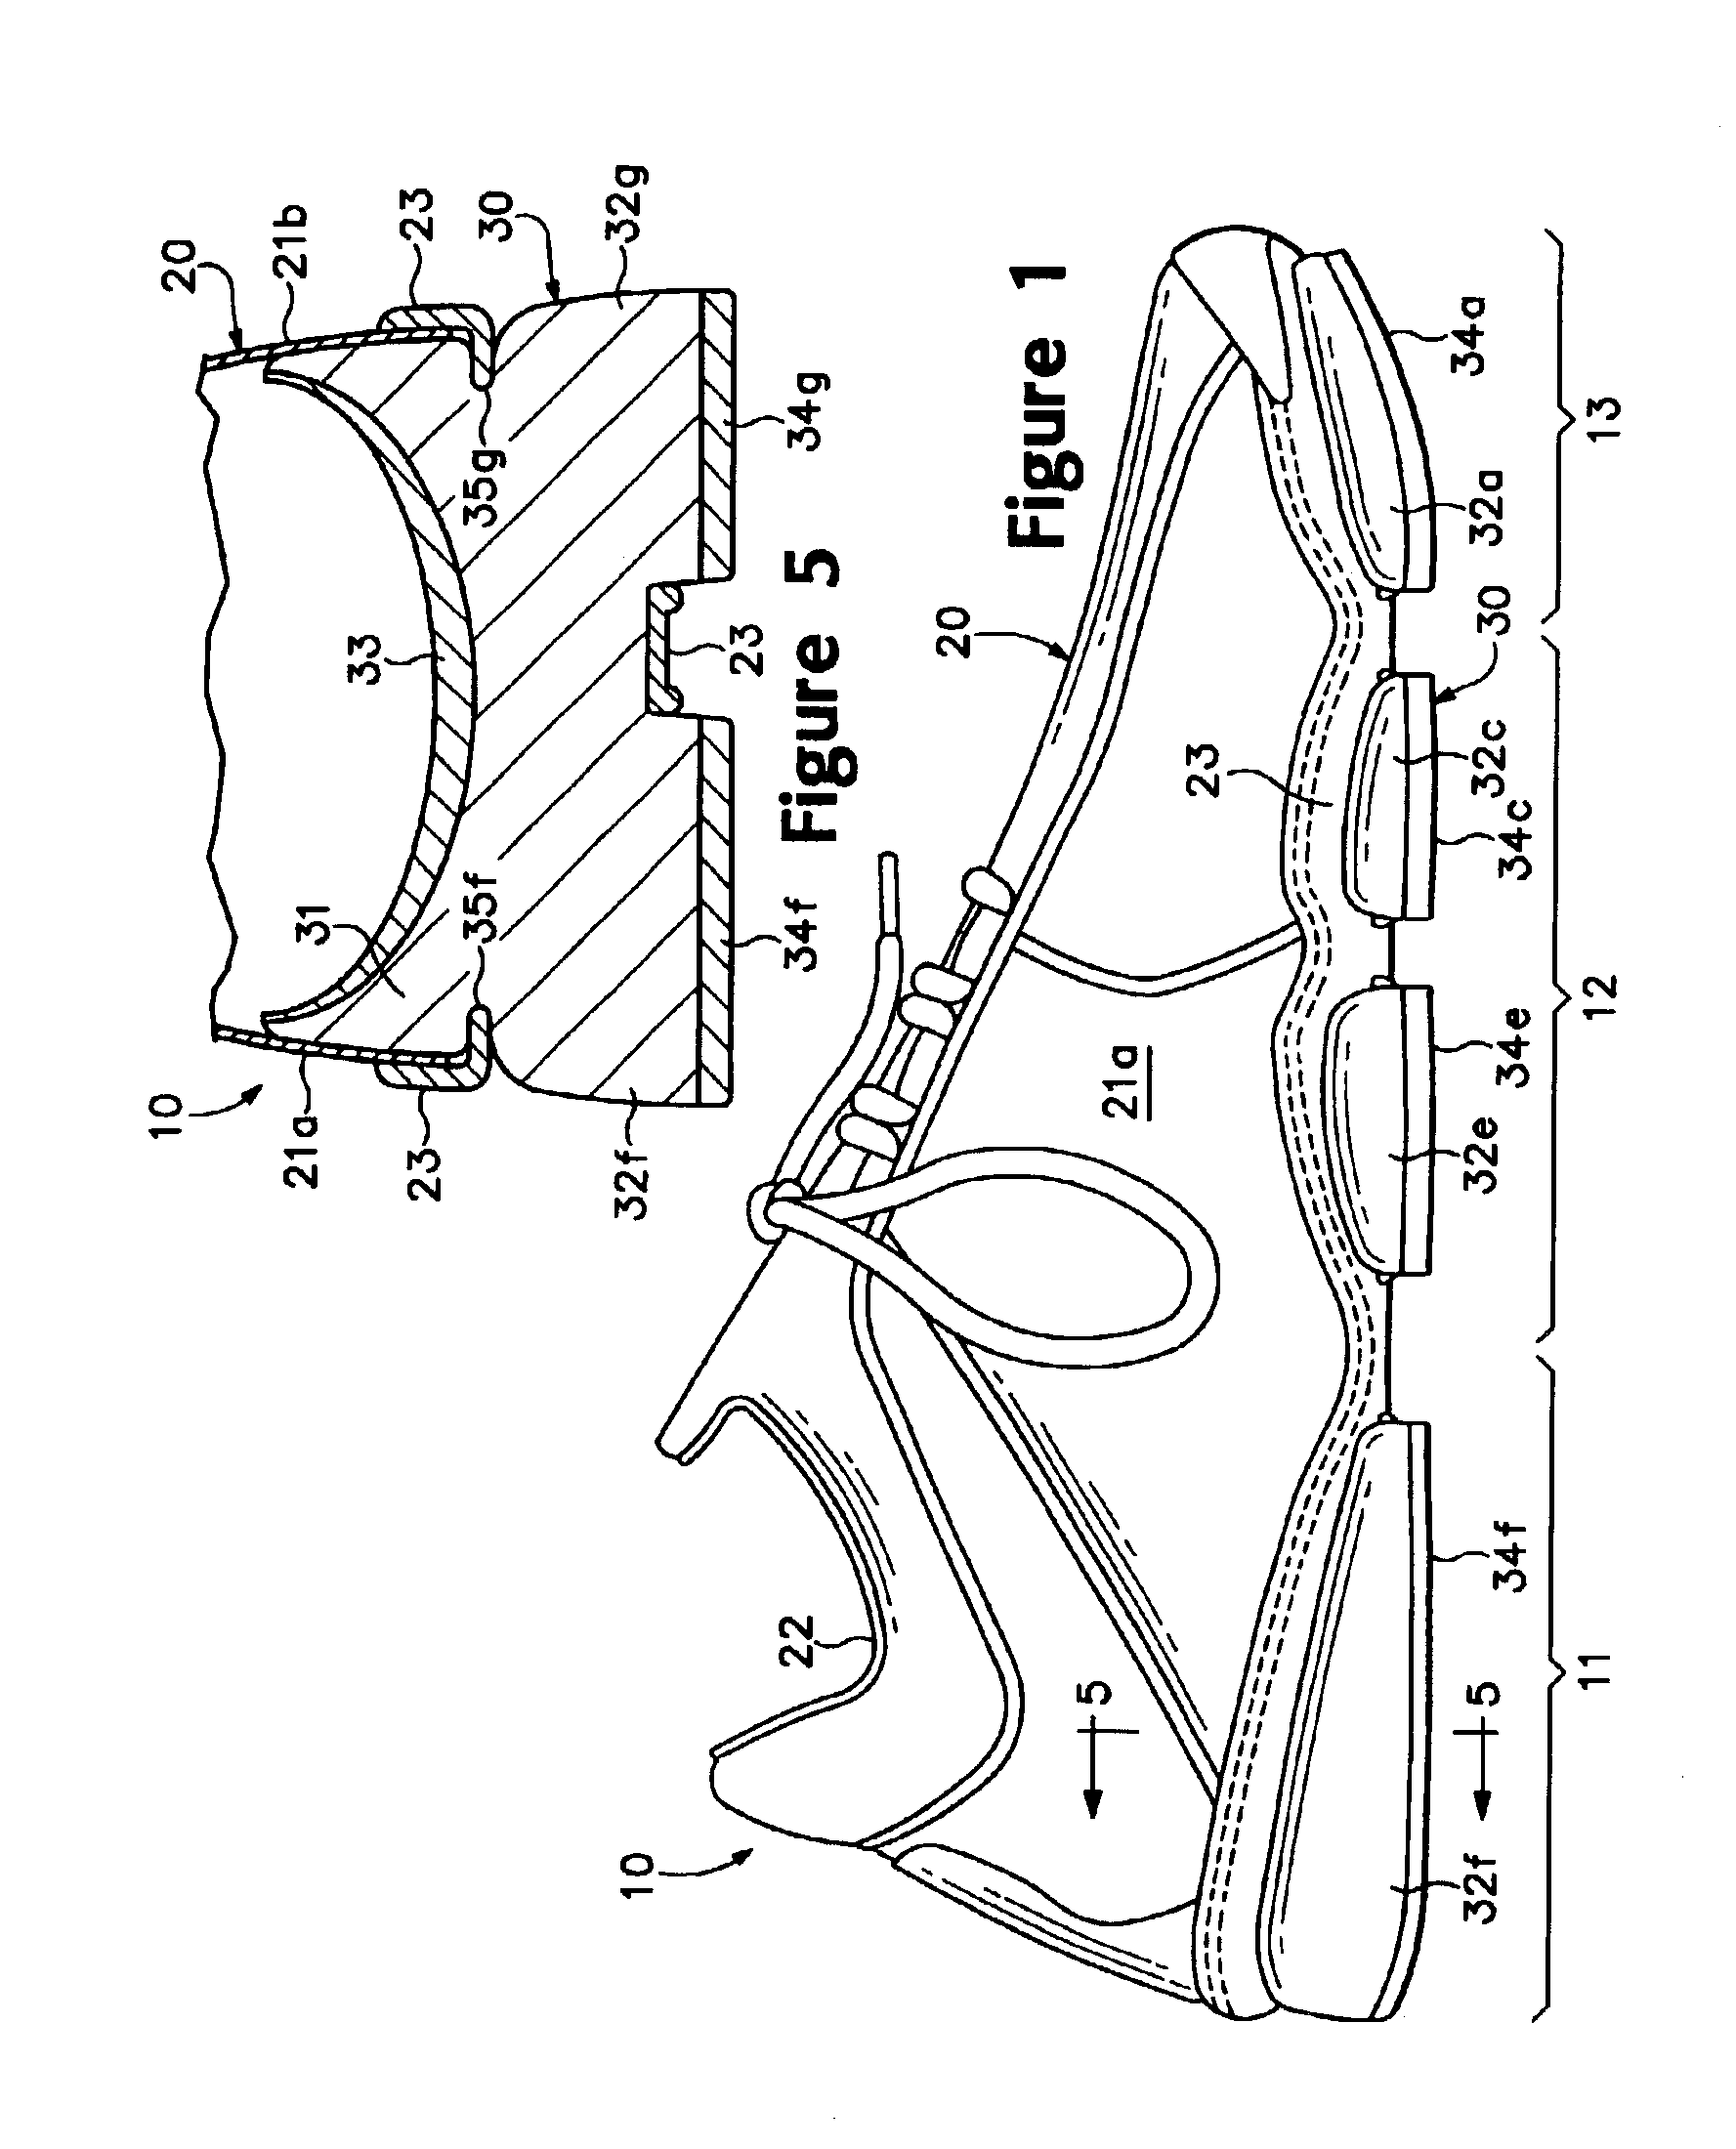 Footwear with separable upper and sole structure